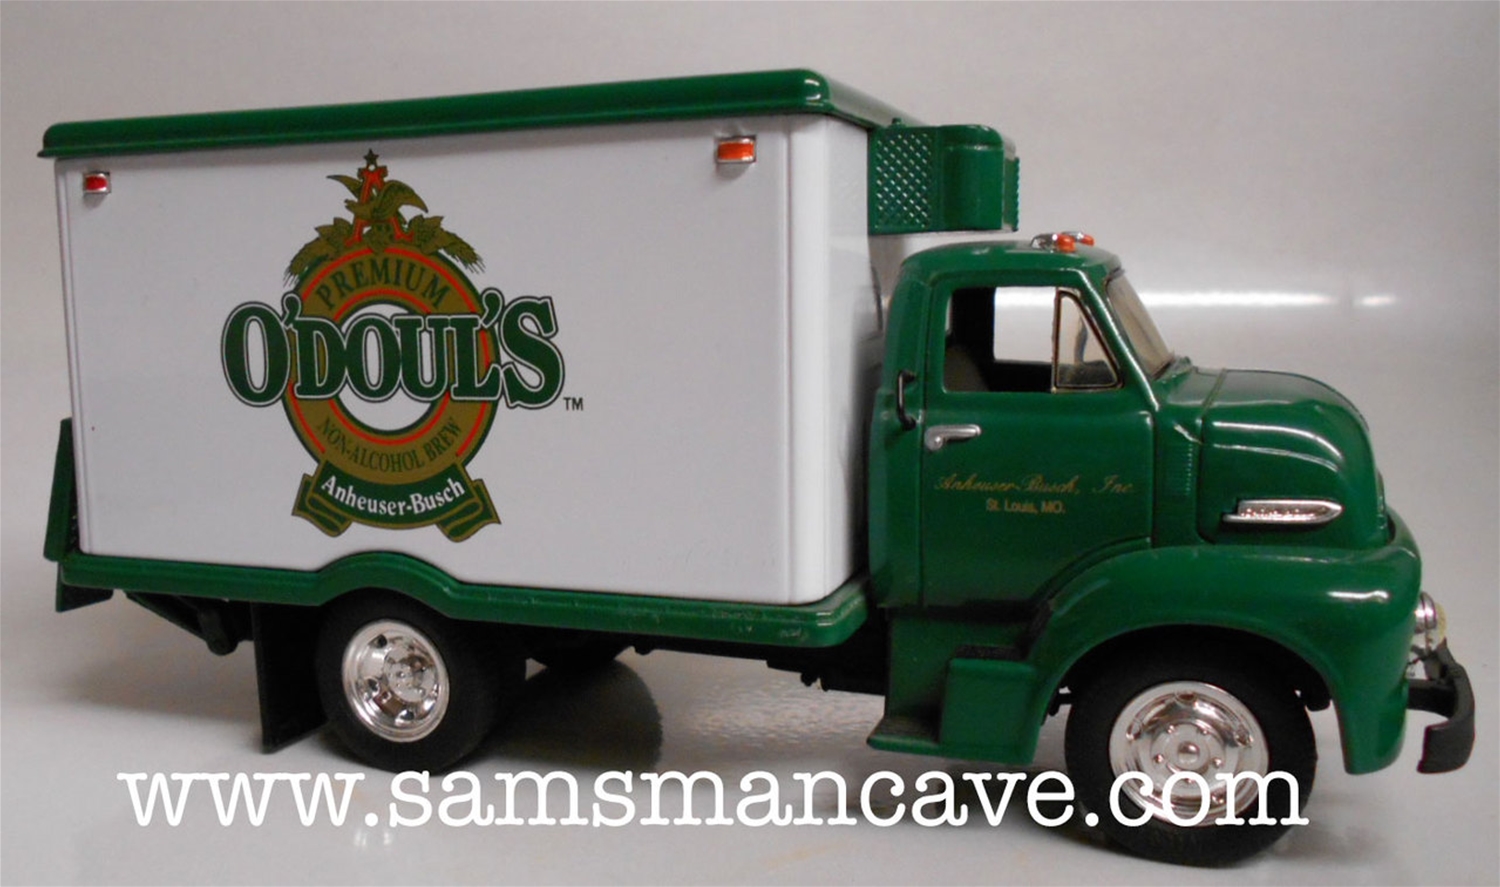 O'Doul's Truck